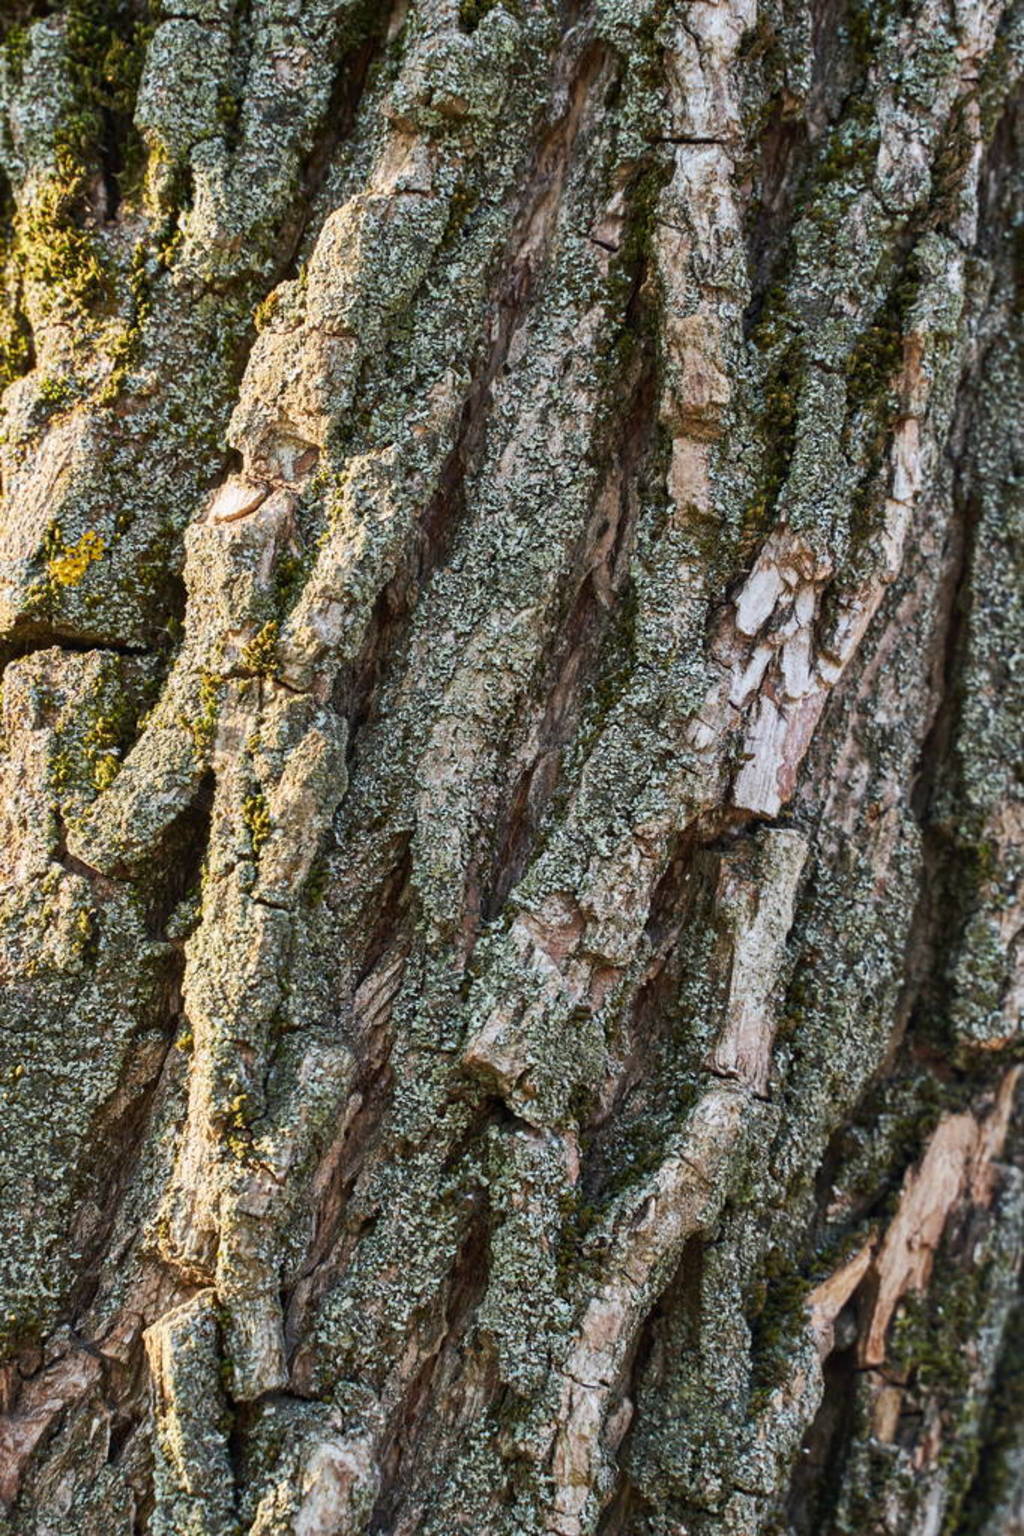 Rough texture of old tree with green and silver moss. Brownish-g